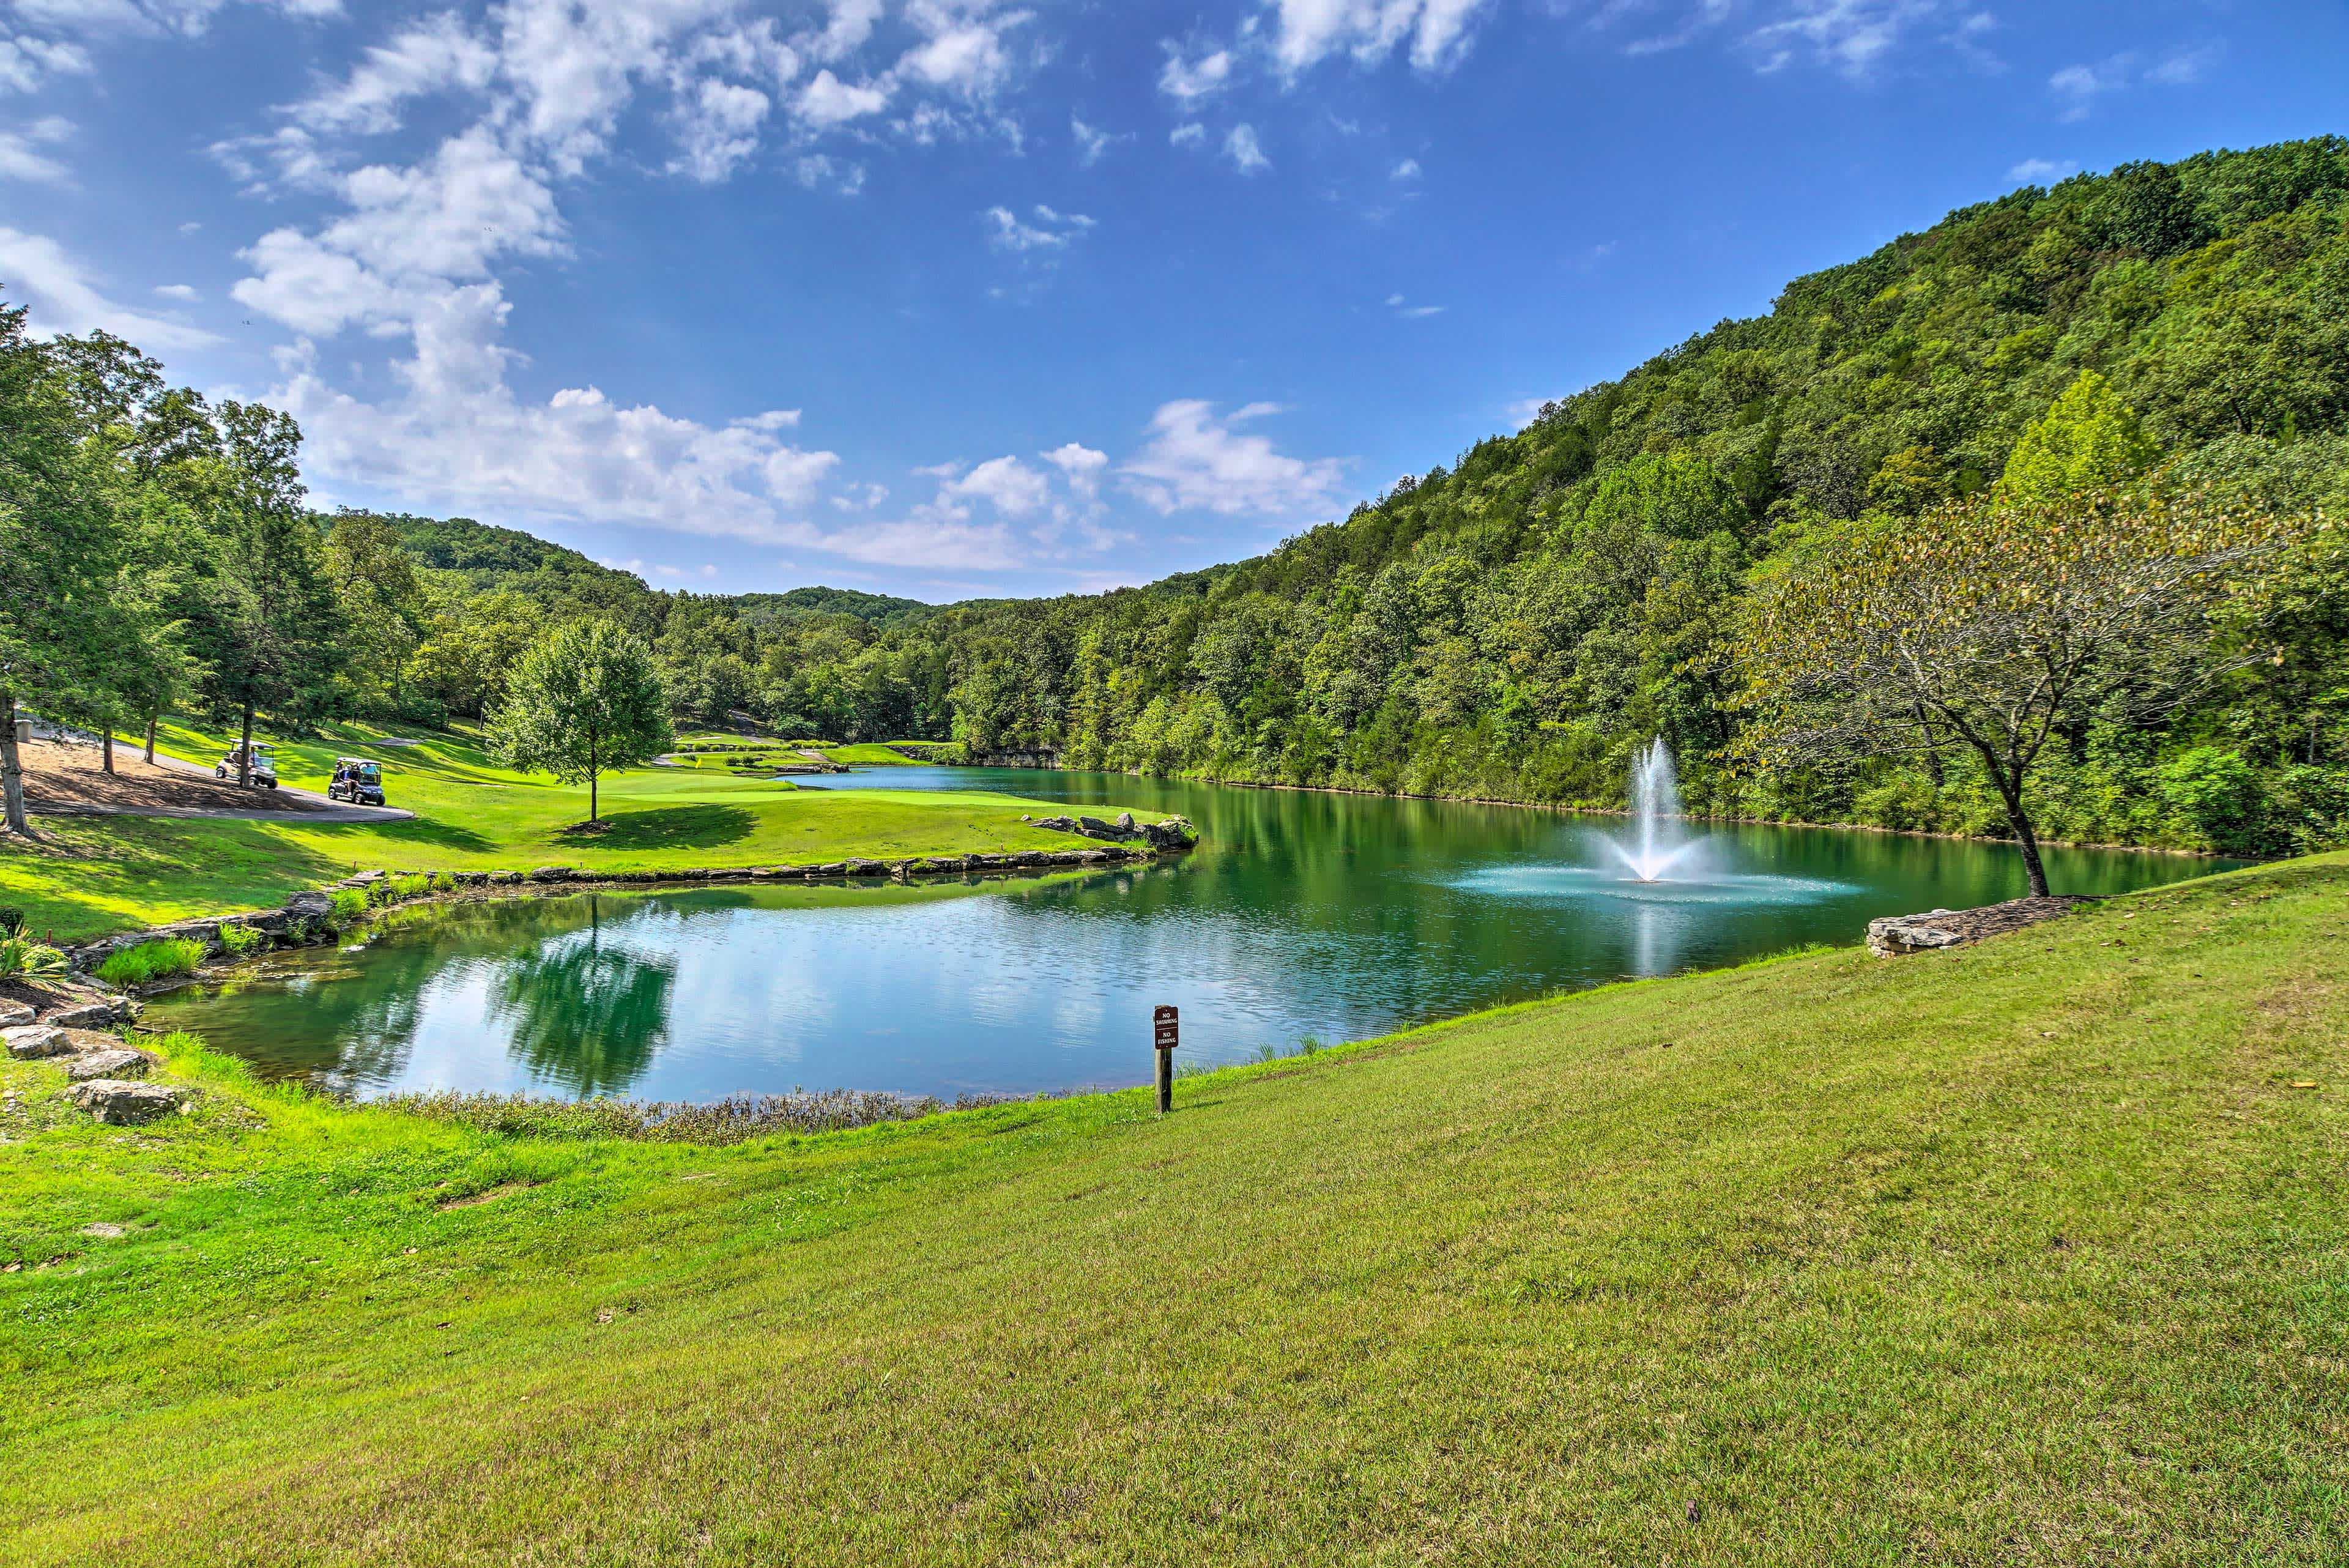 View of a pond with a fountain and tree-covered hills in Branson West, MO